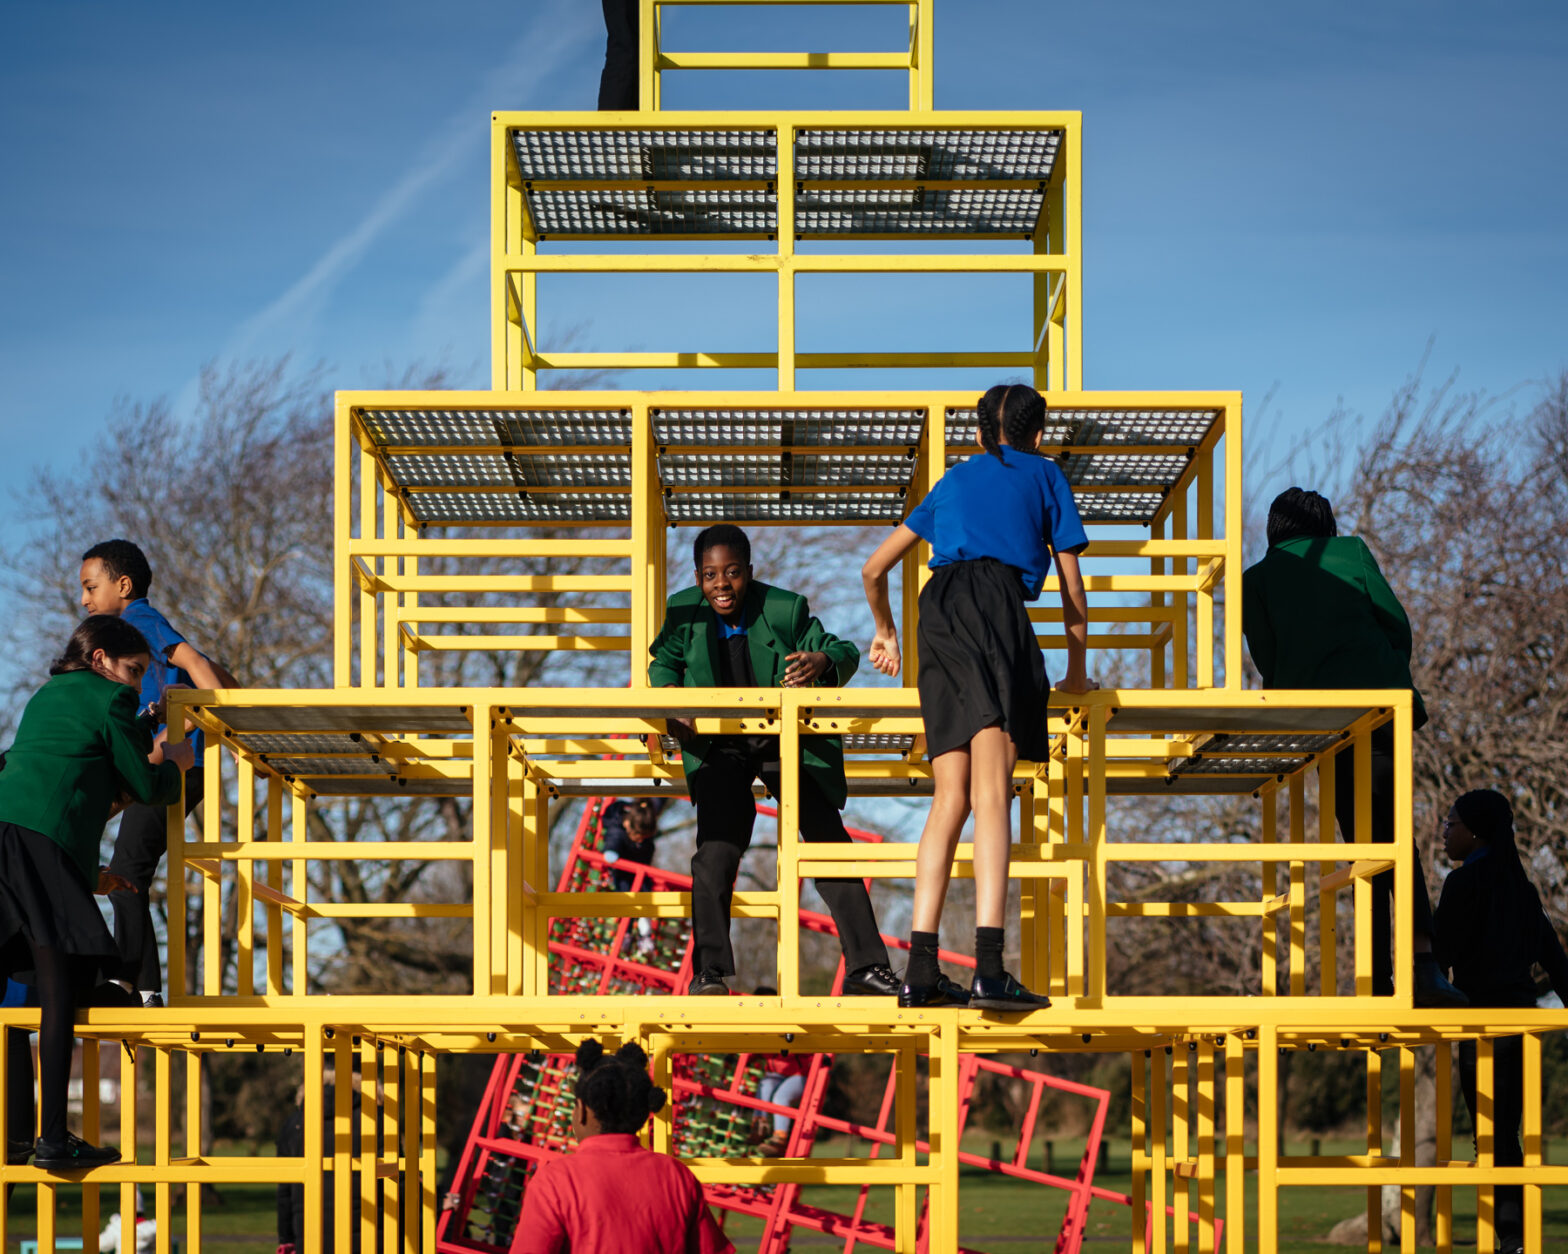 Photograph of the artwork: Eva Rothschild, 'Parsloes Memphis' playground. - Some children on a climbing frame which is the form of pyramid constructed from yellow tubular metal.